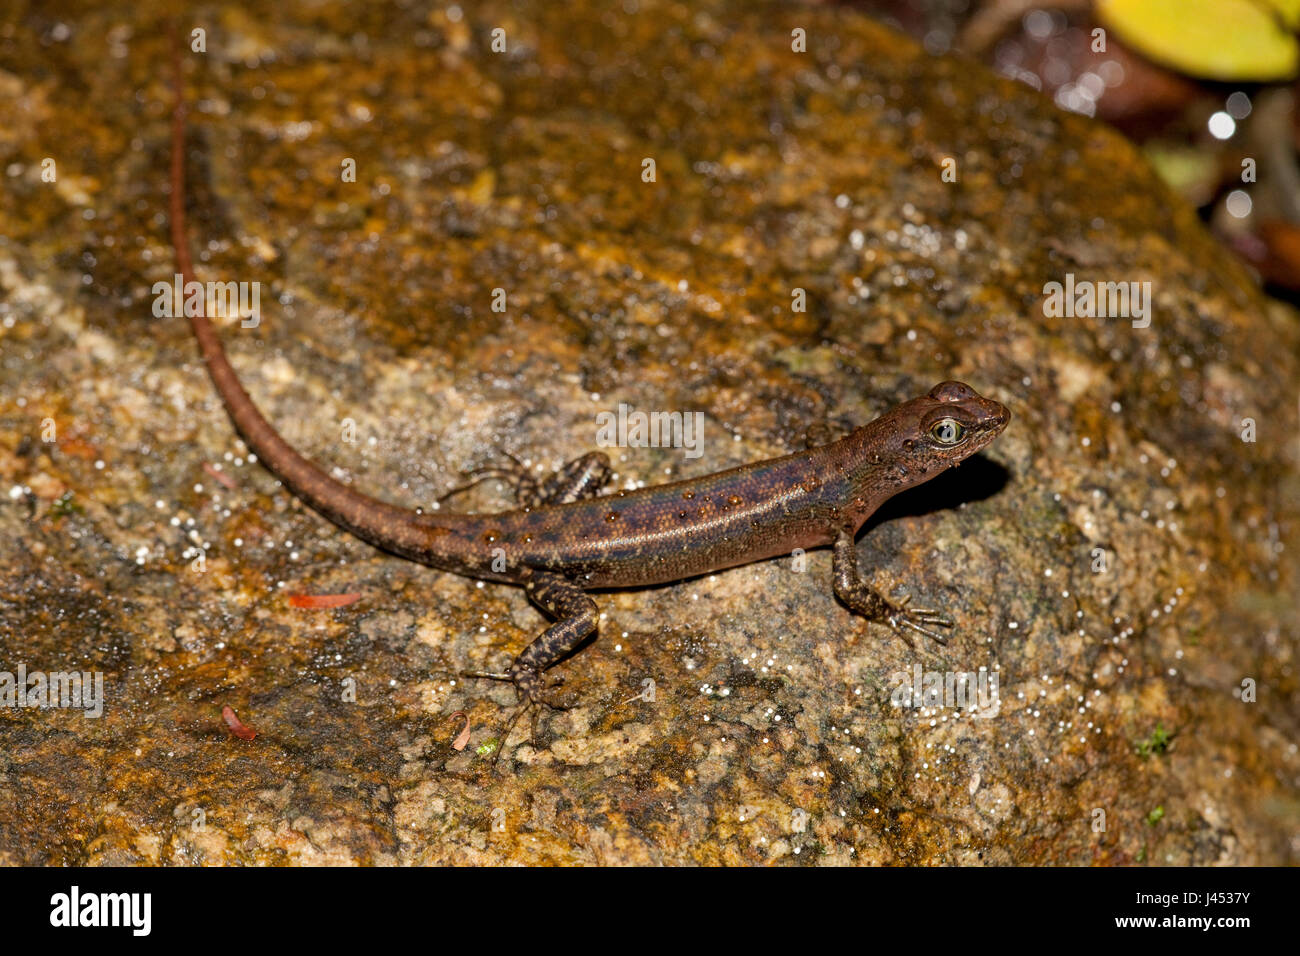 photo of a litter skink on rocks Stock Photo